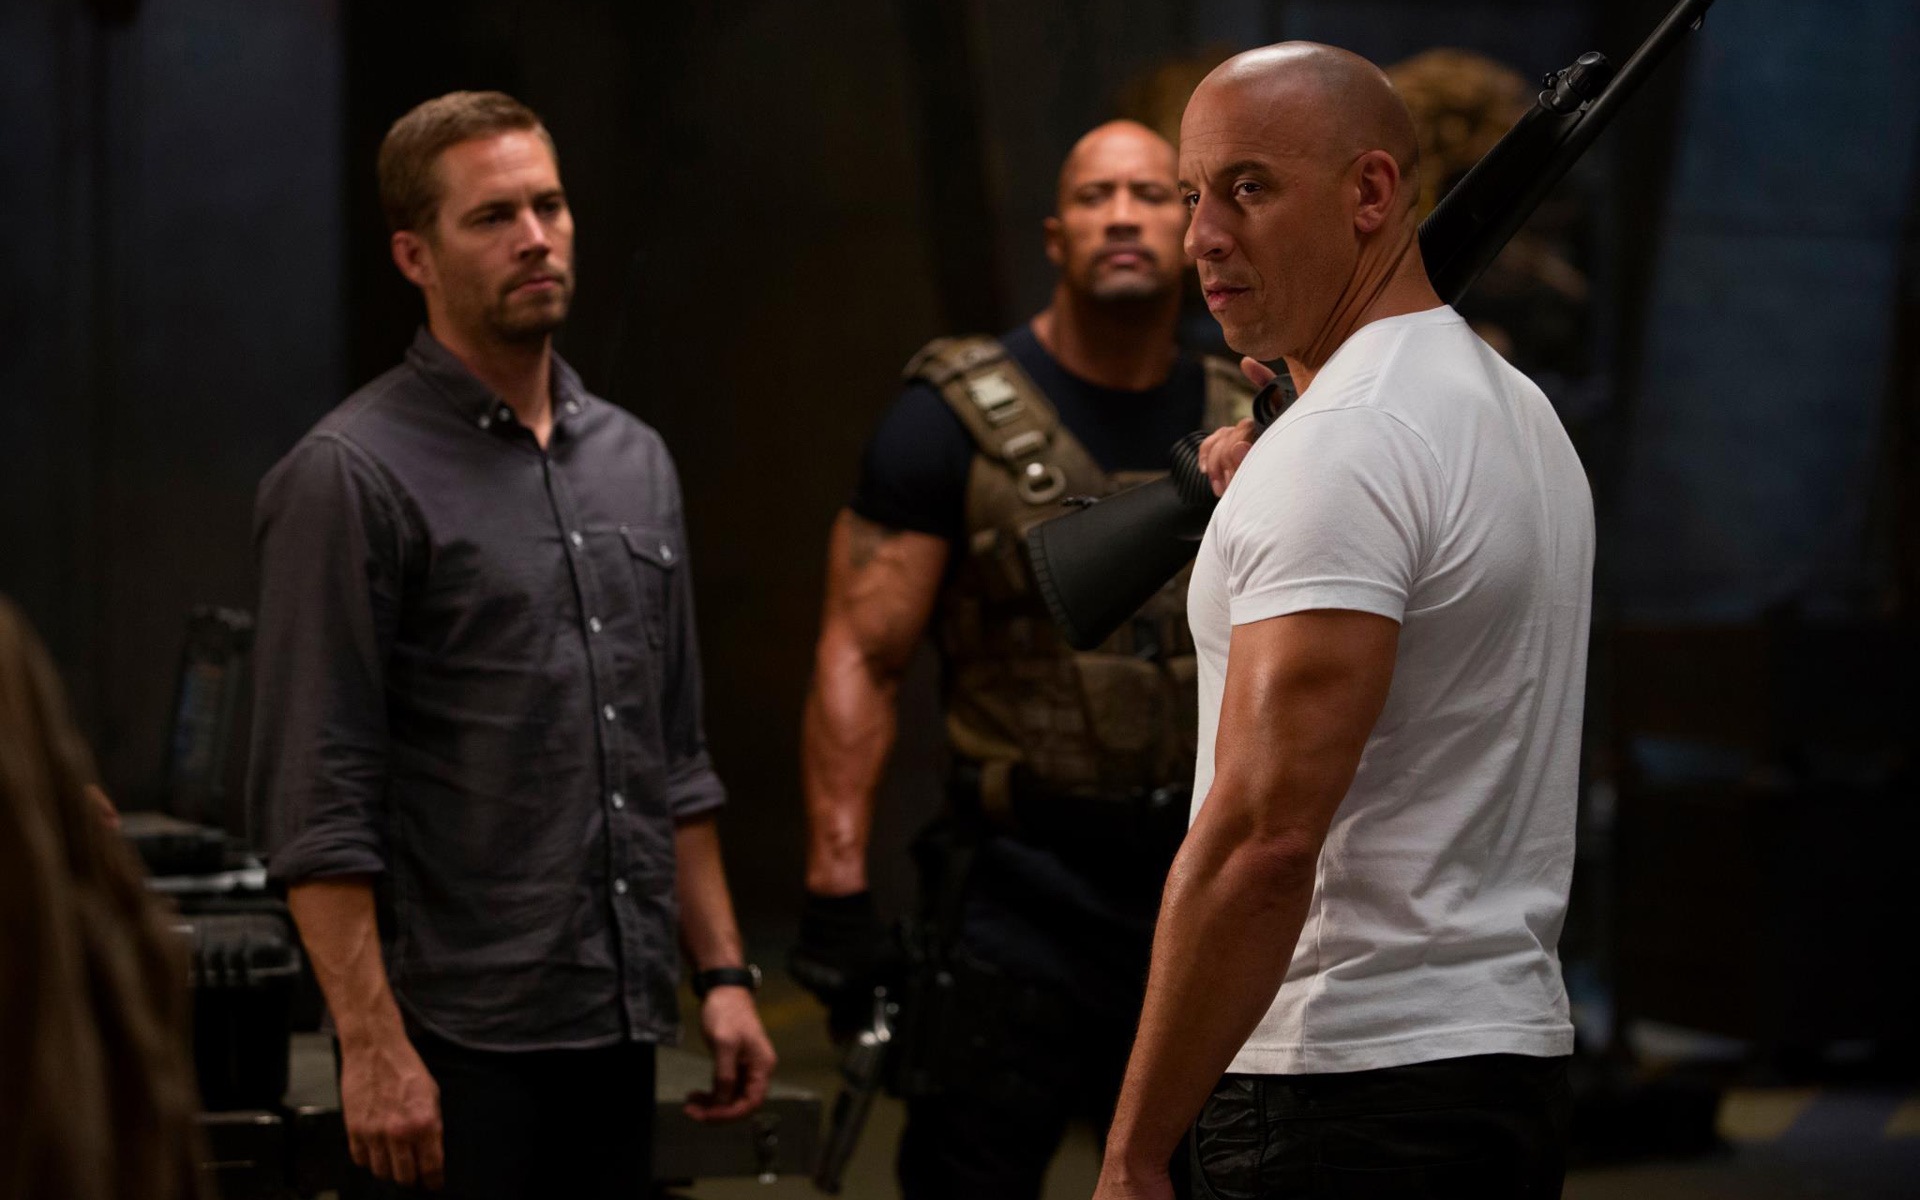 Fast And Furious 6 HD movie wallpapers #5 - 1920x1200